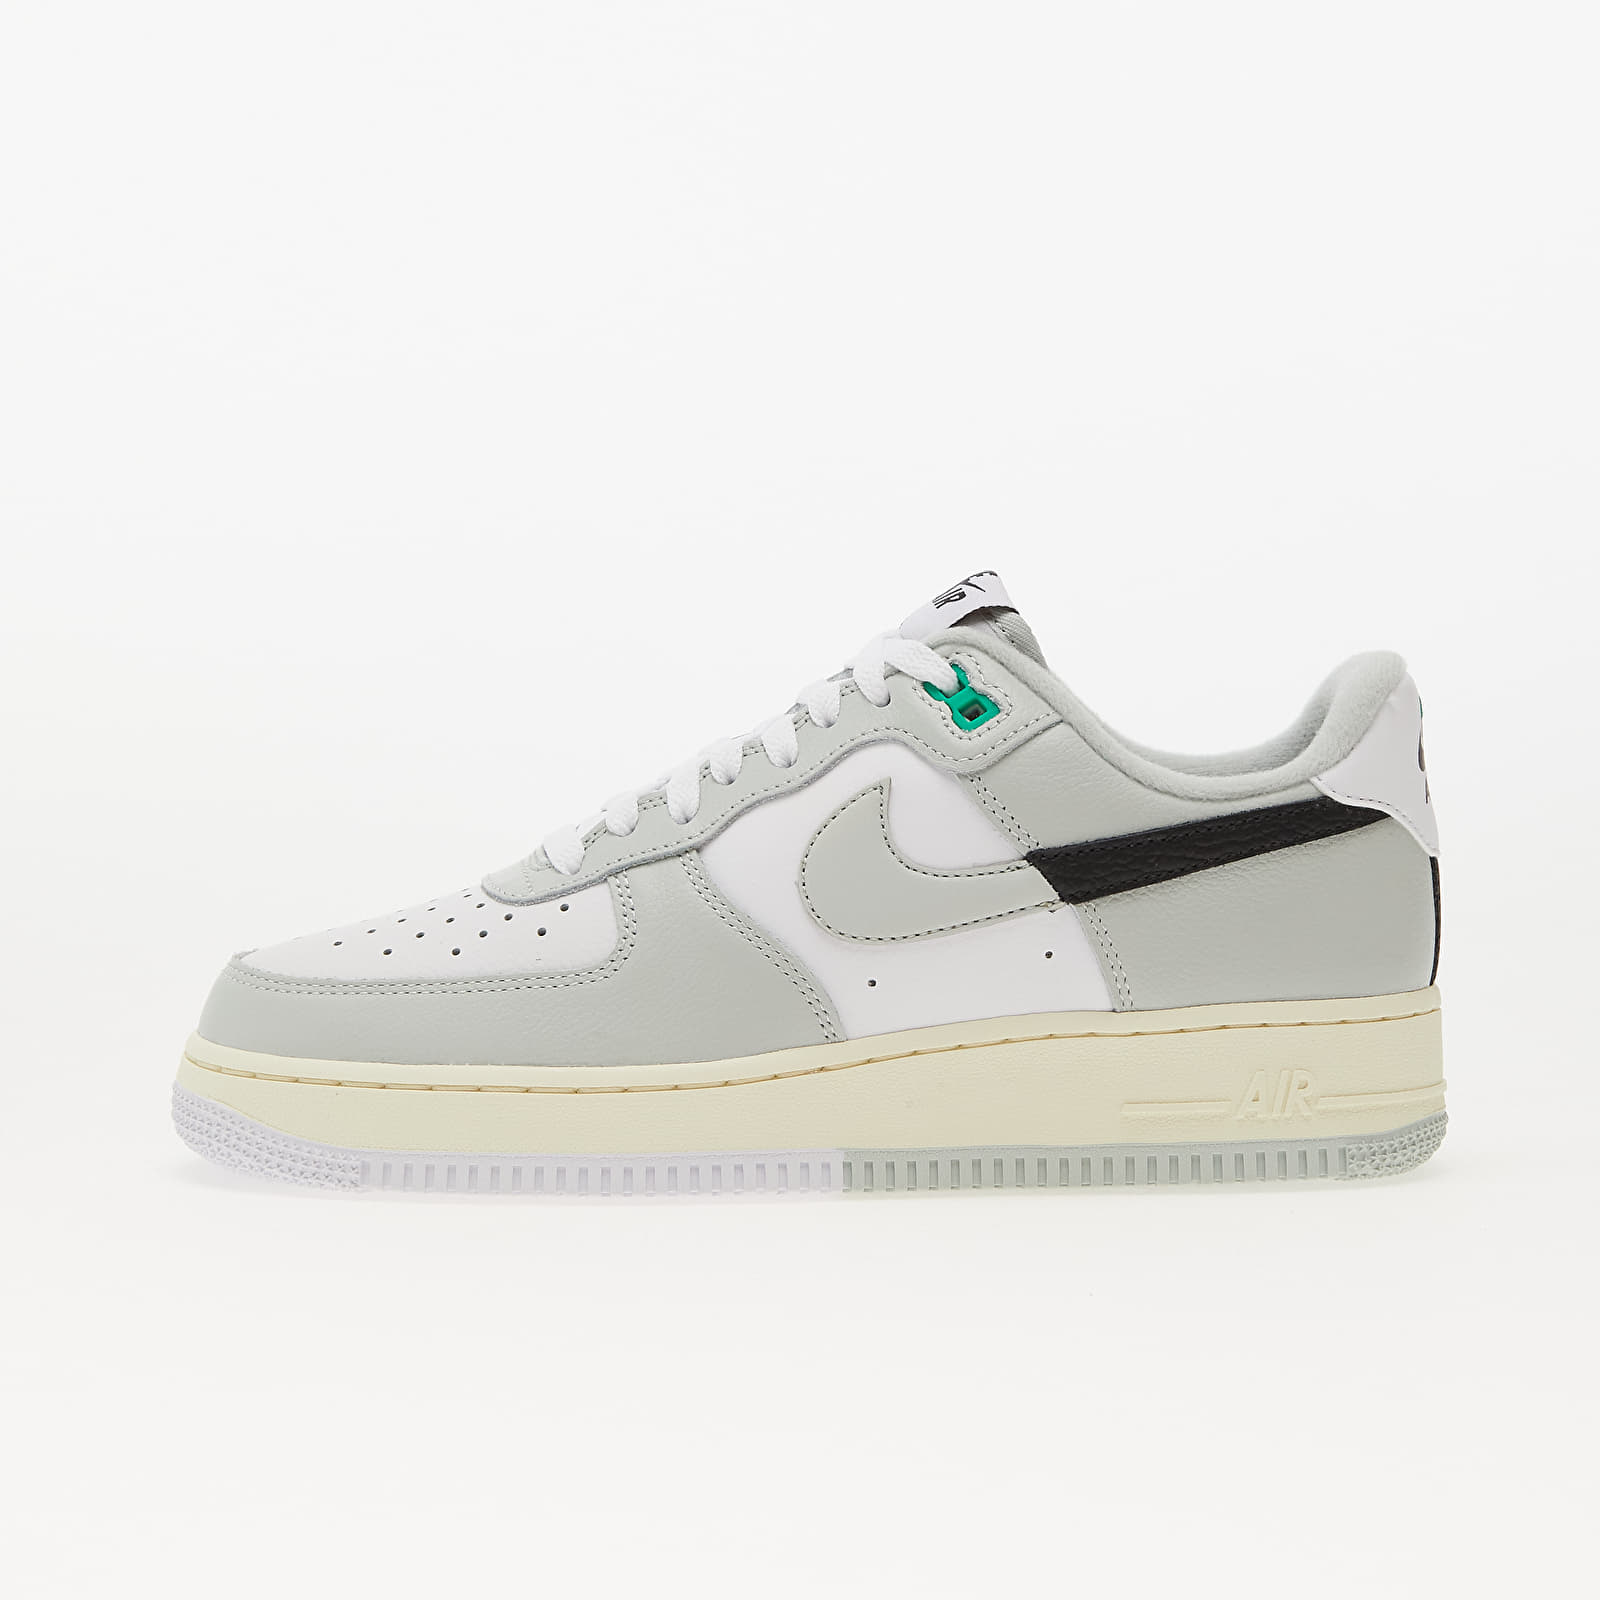 Chaussures et baskets homme Nike Air Force 1 '07 LV8 Light Silver/ Black-Light Silver-White